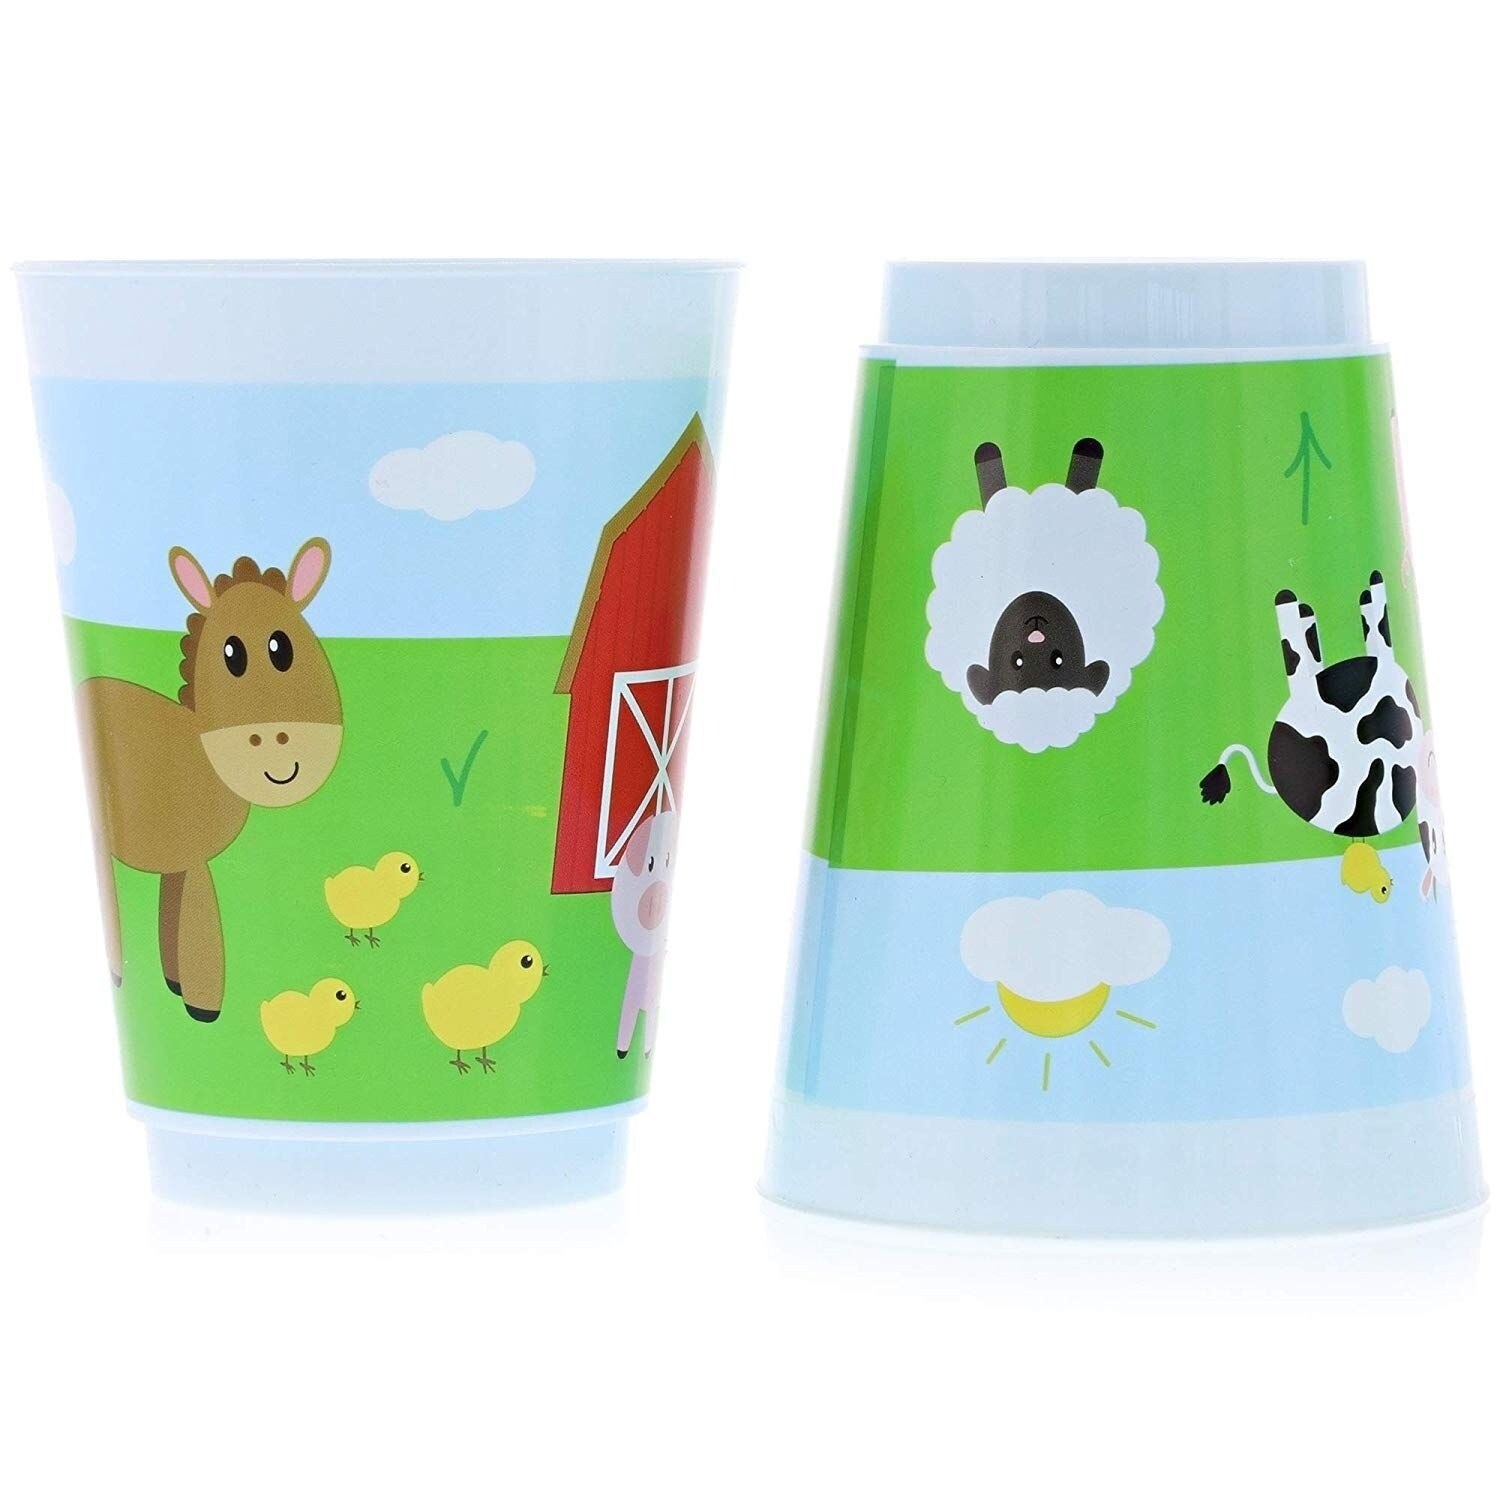 https://ak1.ostkcdn.com/images/products/31094317/16-Pack-Plastic-16-oz-Party-Cups-Farm-Animal-Reusable-Tumblers-for-Kids-Birthday-Parties-03550bec-4967-4329-8611-2b78a0315ca9.jpg